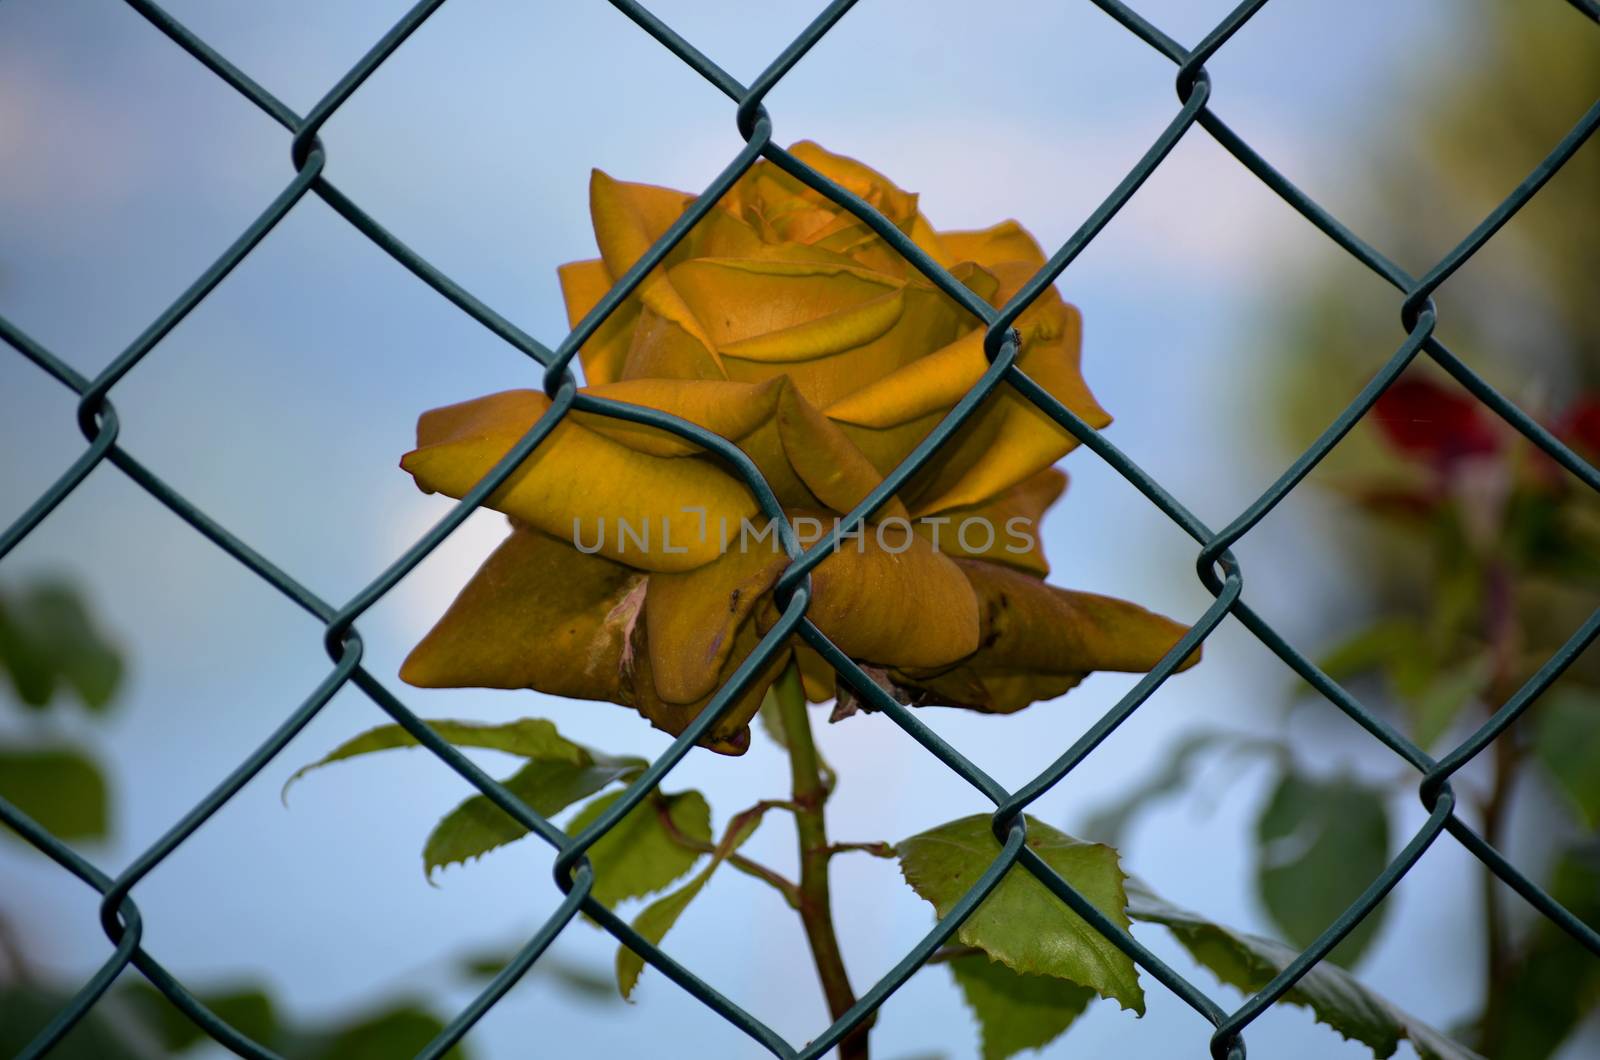 Rose imprisoned dried by inguaribile